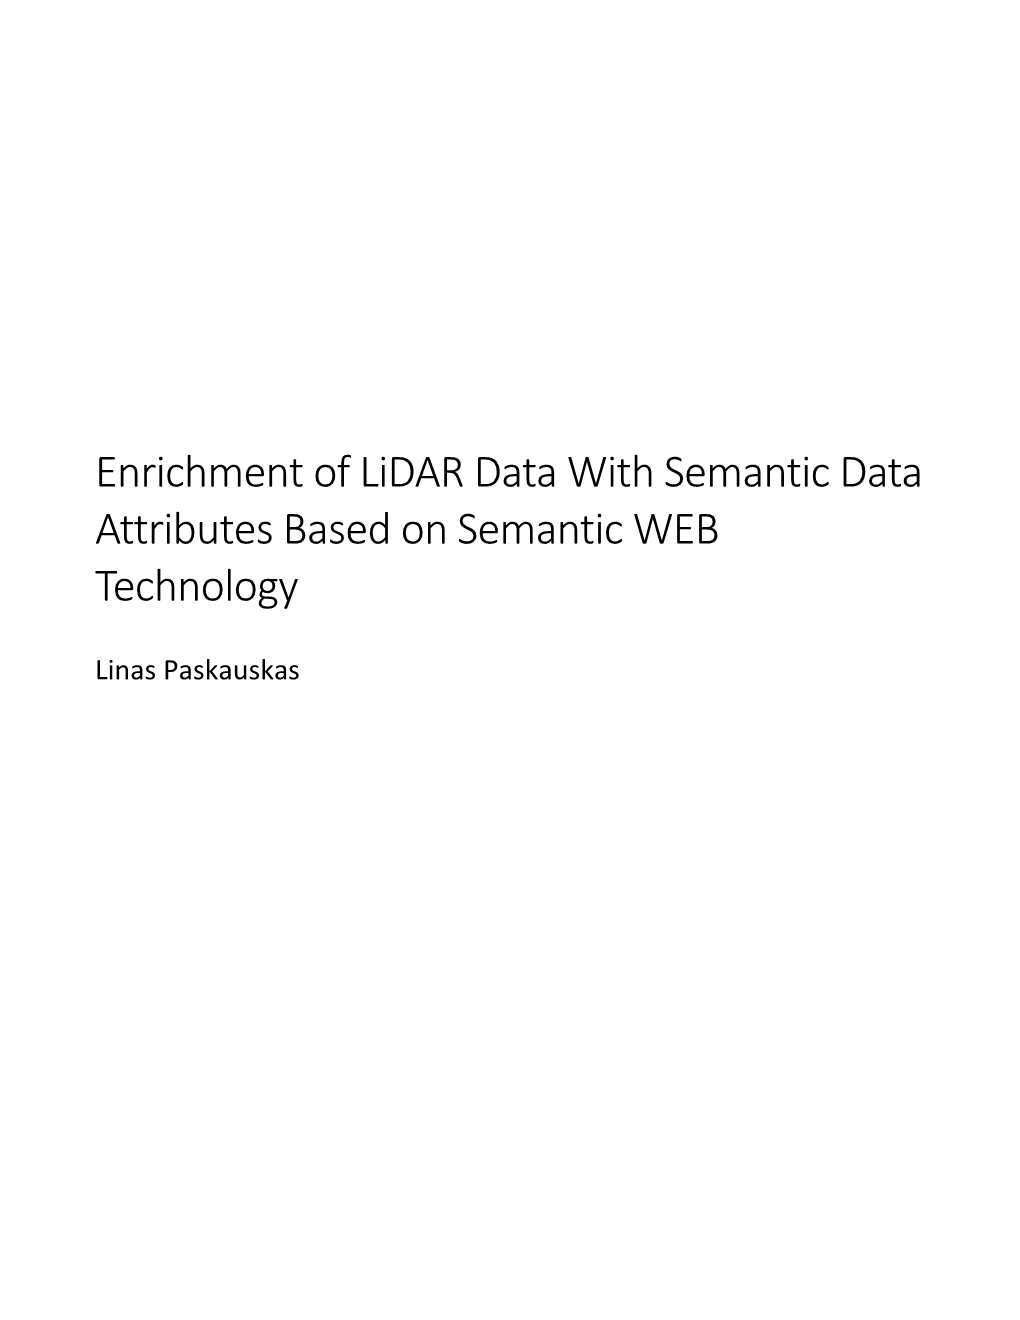 Enrichment of Lidar Data with Semantic Data Attributes Based on Semantic WEB Technology